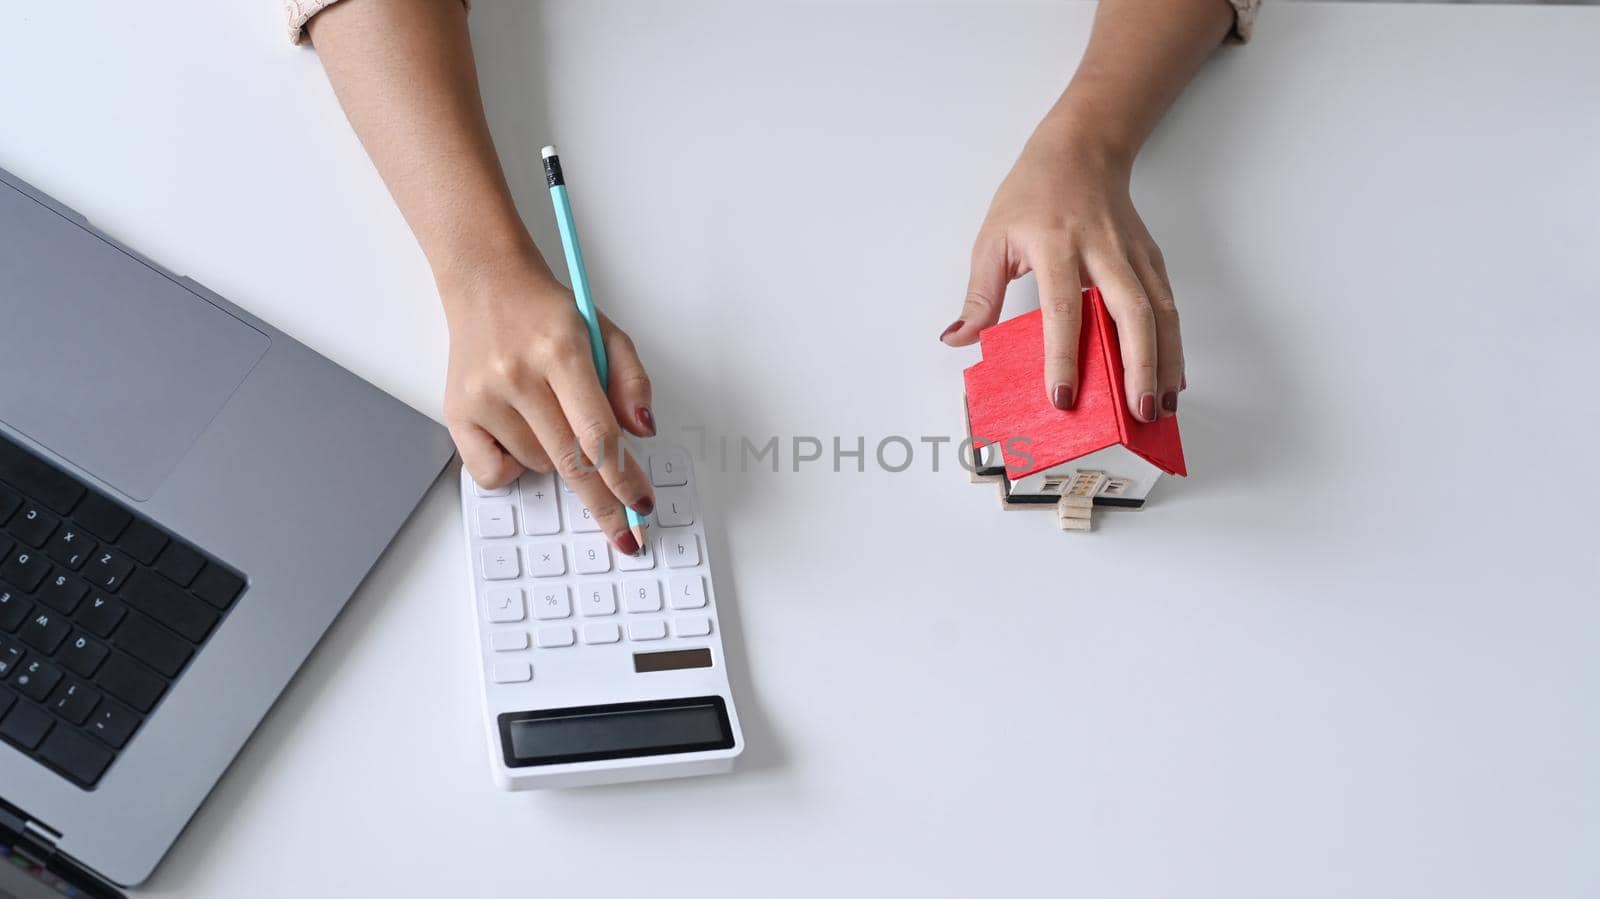 Overhead view real estate agent using calculator on white office desk. Real estate investment and insurance concept.